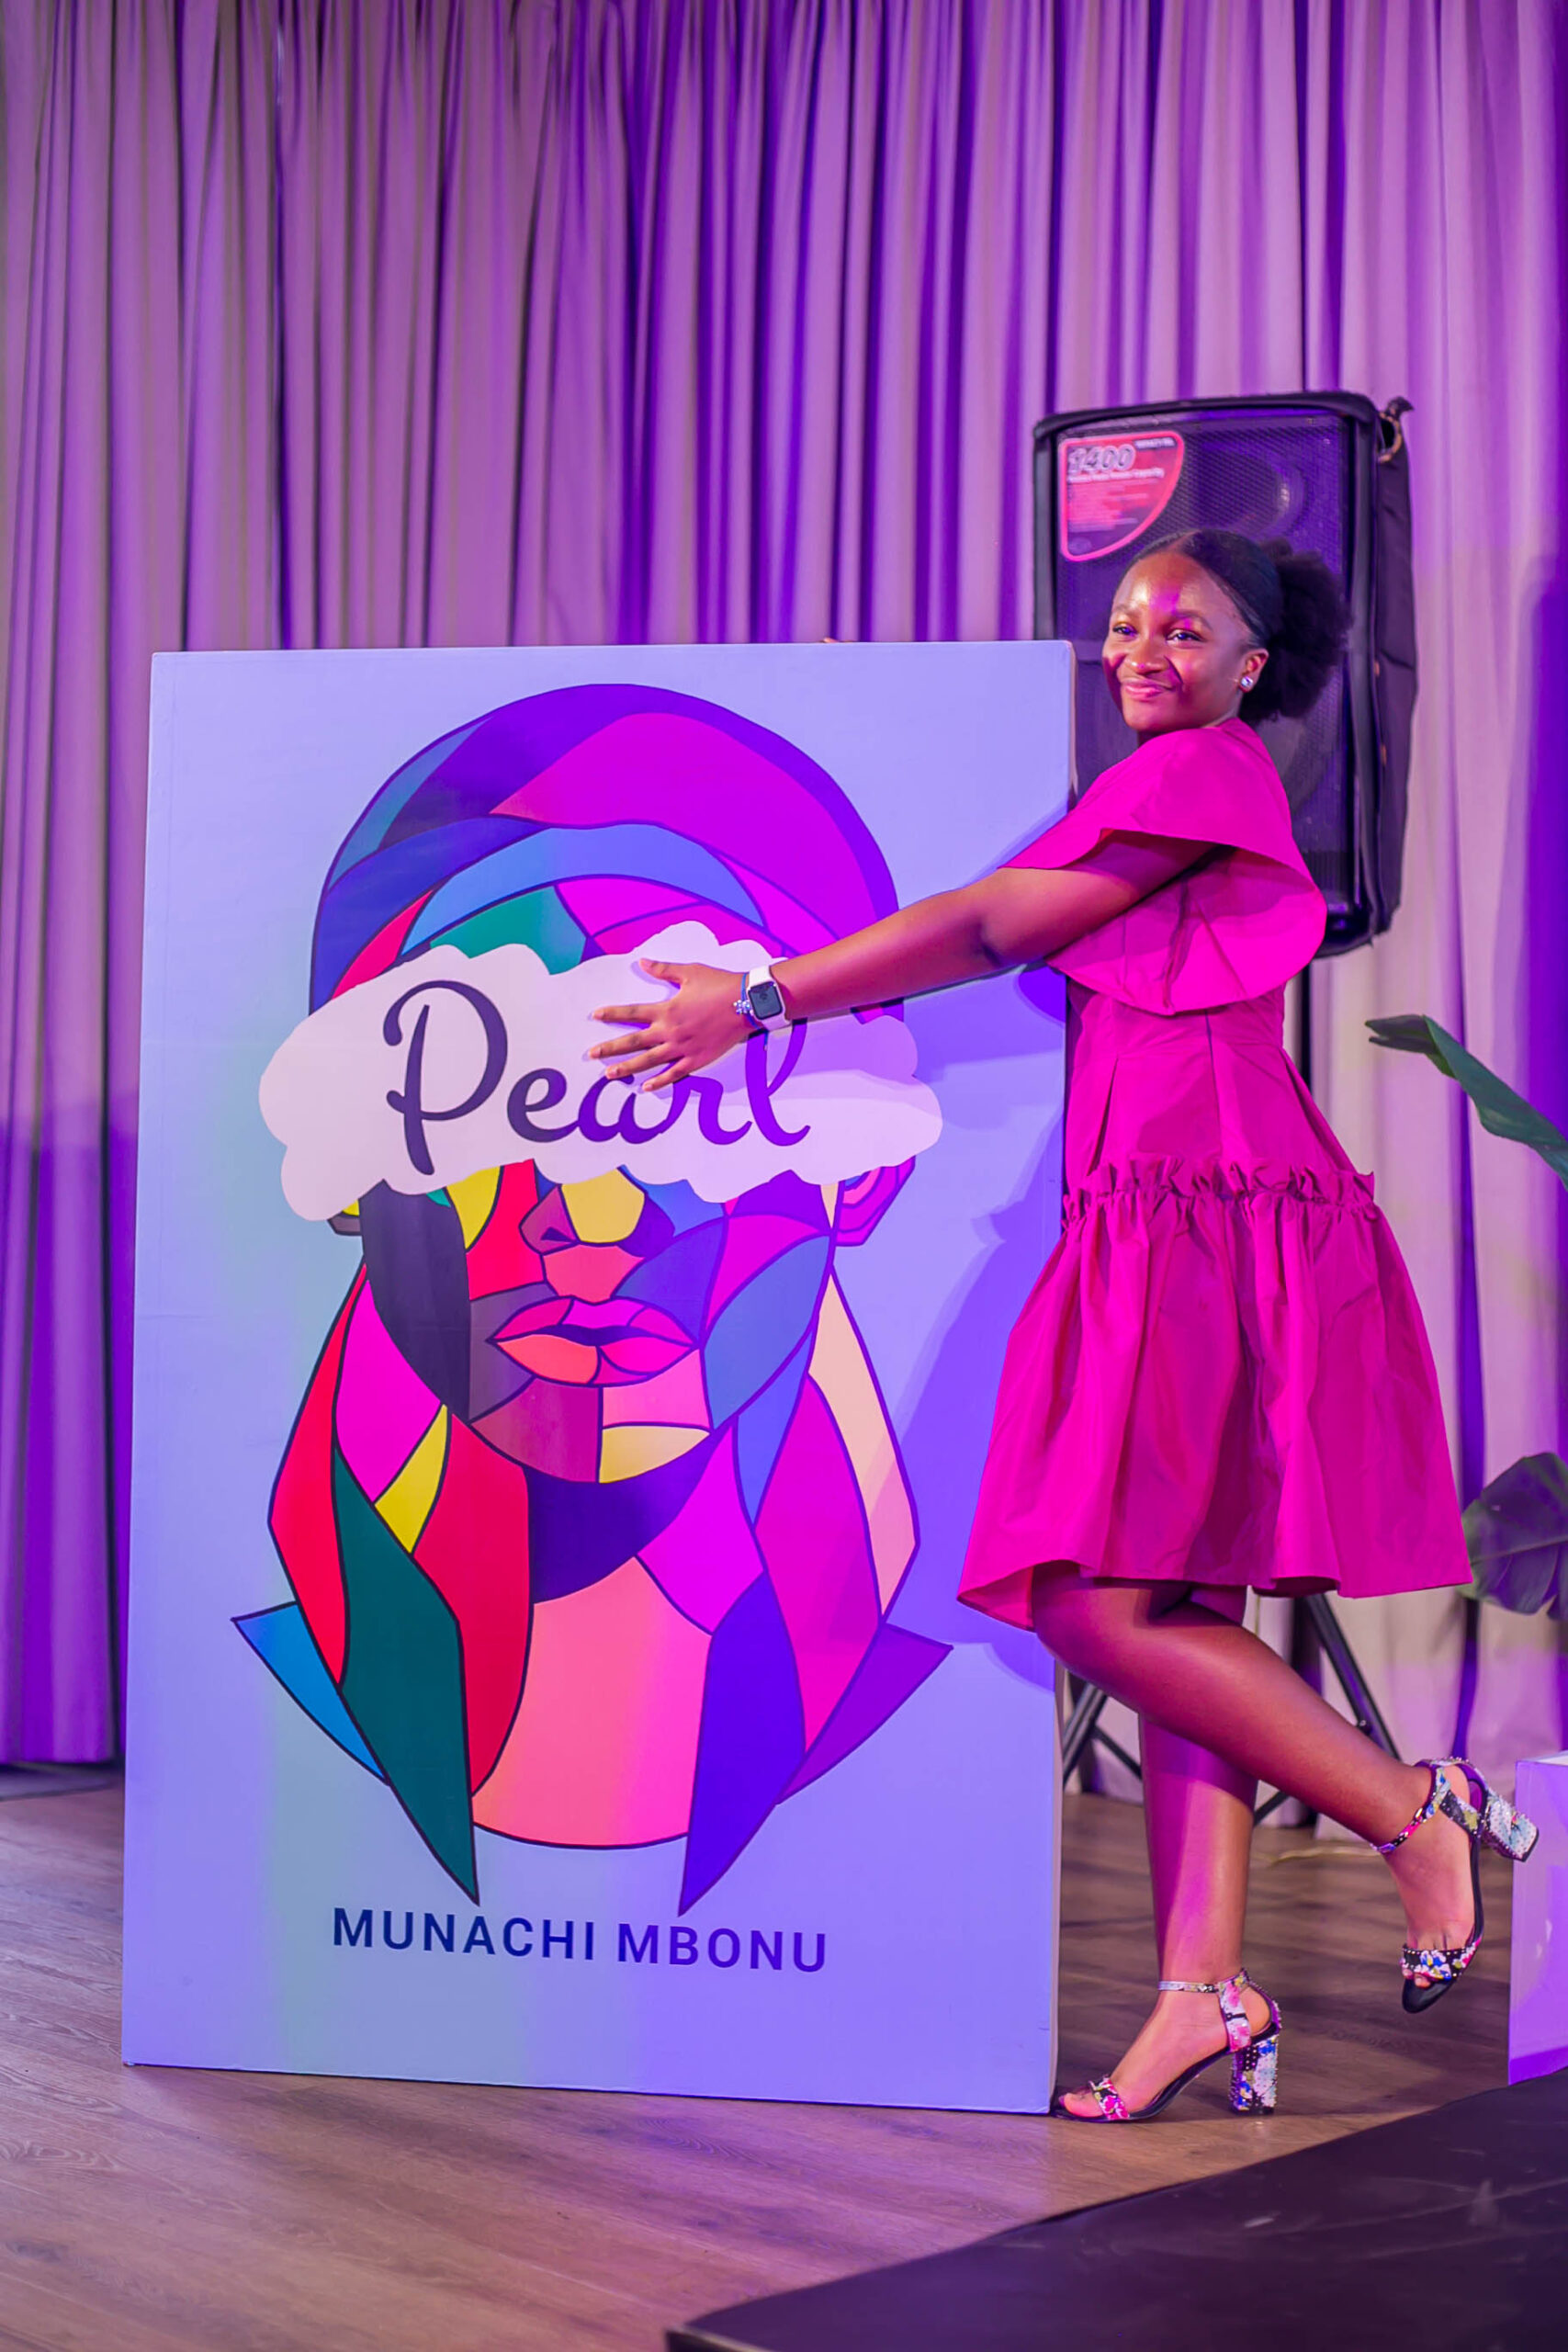 Nigerian author, Munachi Mbonu, has launched her newest book, PEARL